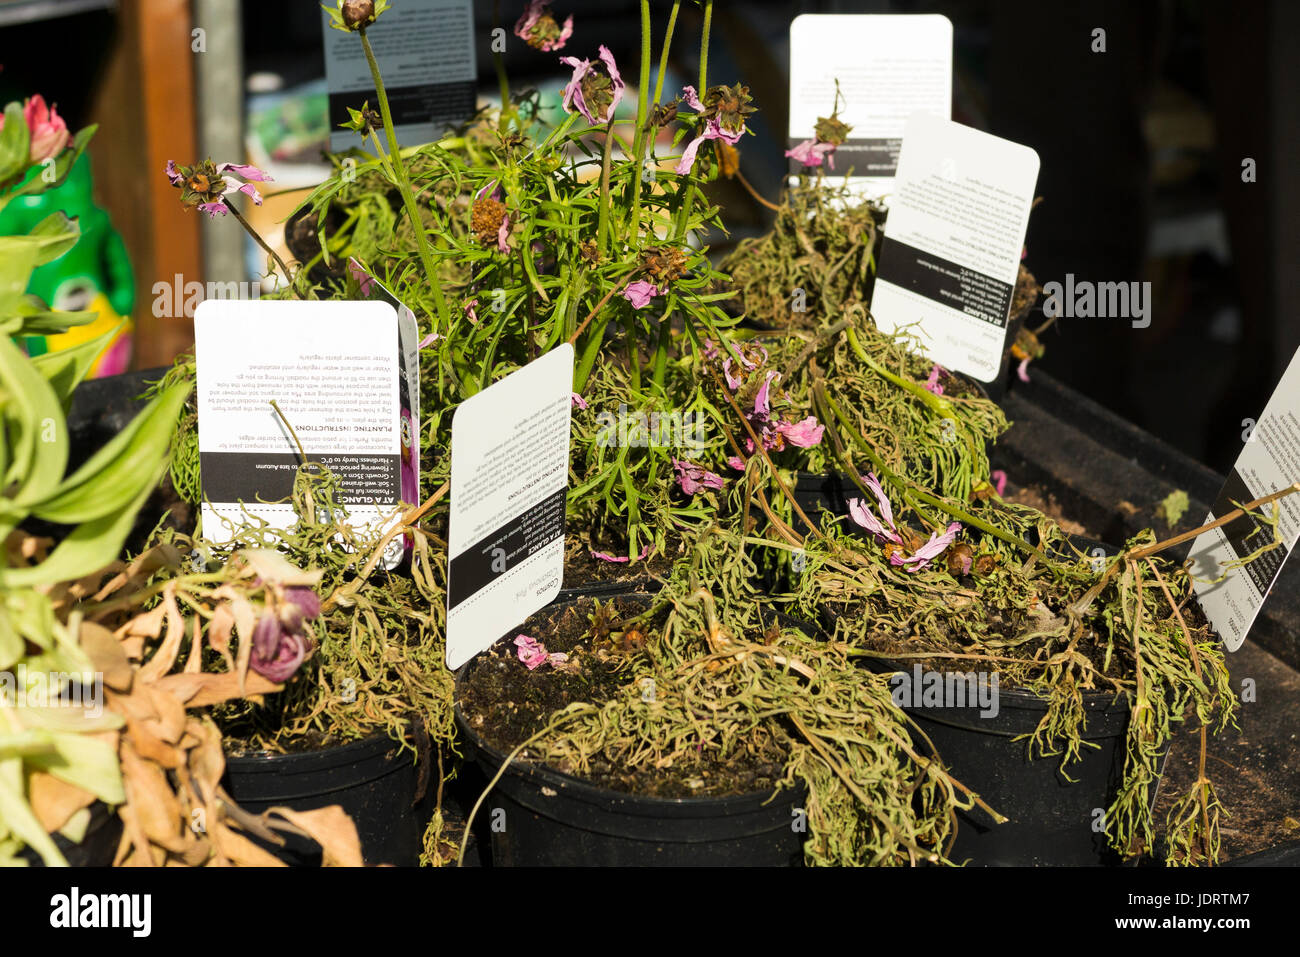 Flower / flowers / bedding plant for sale at Waitrose supermarket. Wilted wilting plants are dying due to lack of care / watering / shortage of water. Stock Photo